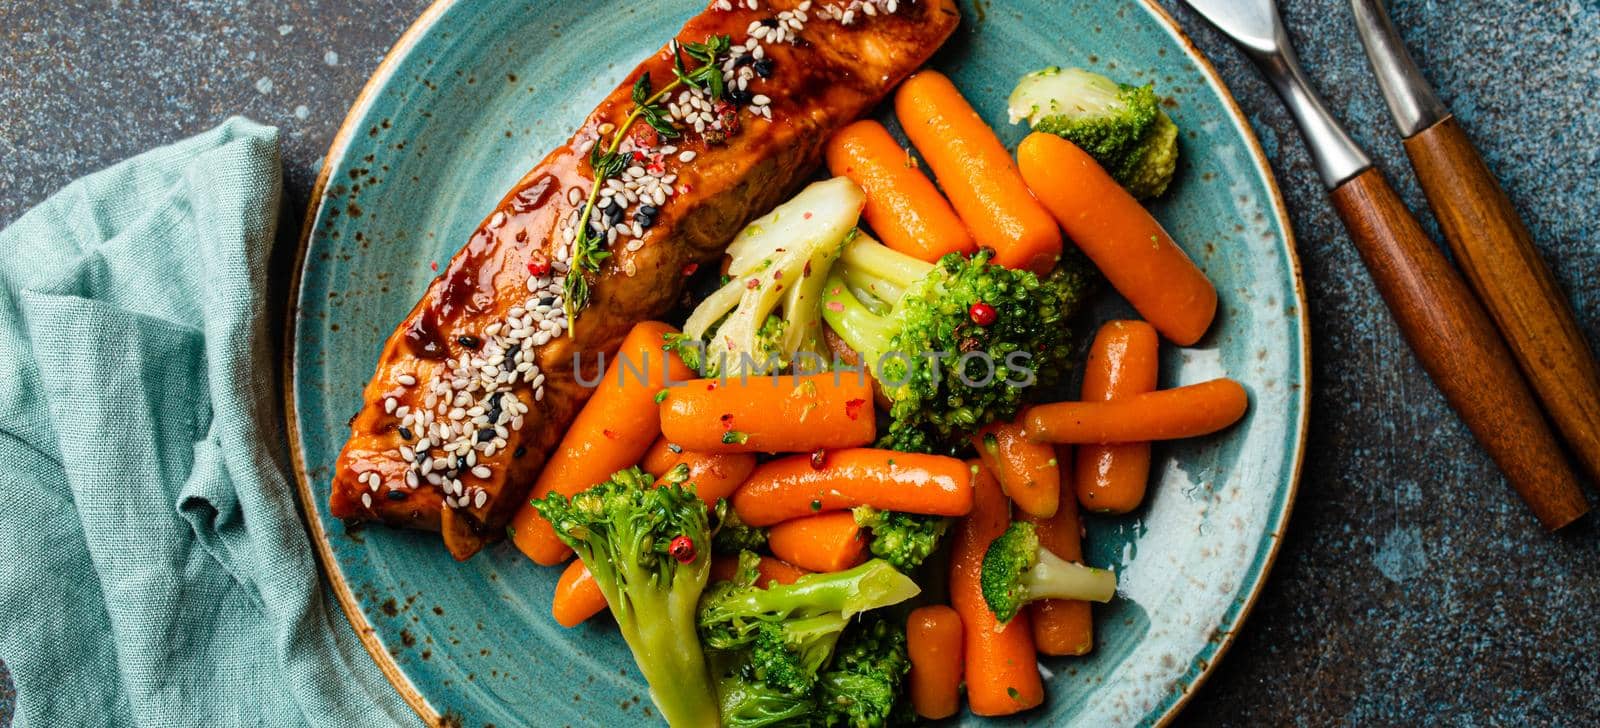 Grilled salmon fillet steak in teriyaki sauce with roasted vegetables carrot and broccoli on plate with fork and knife top view on rustic concrete background table, healthy diet and eating concept